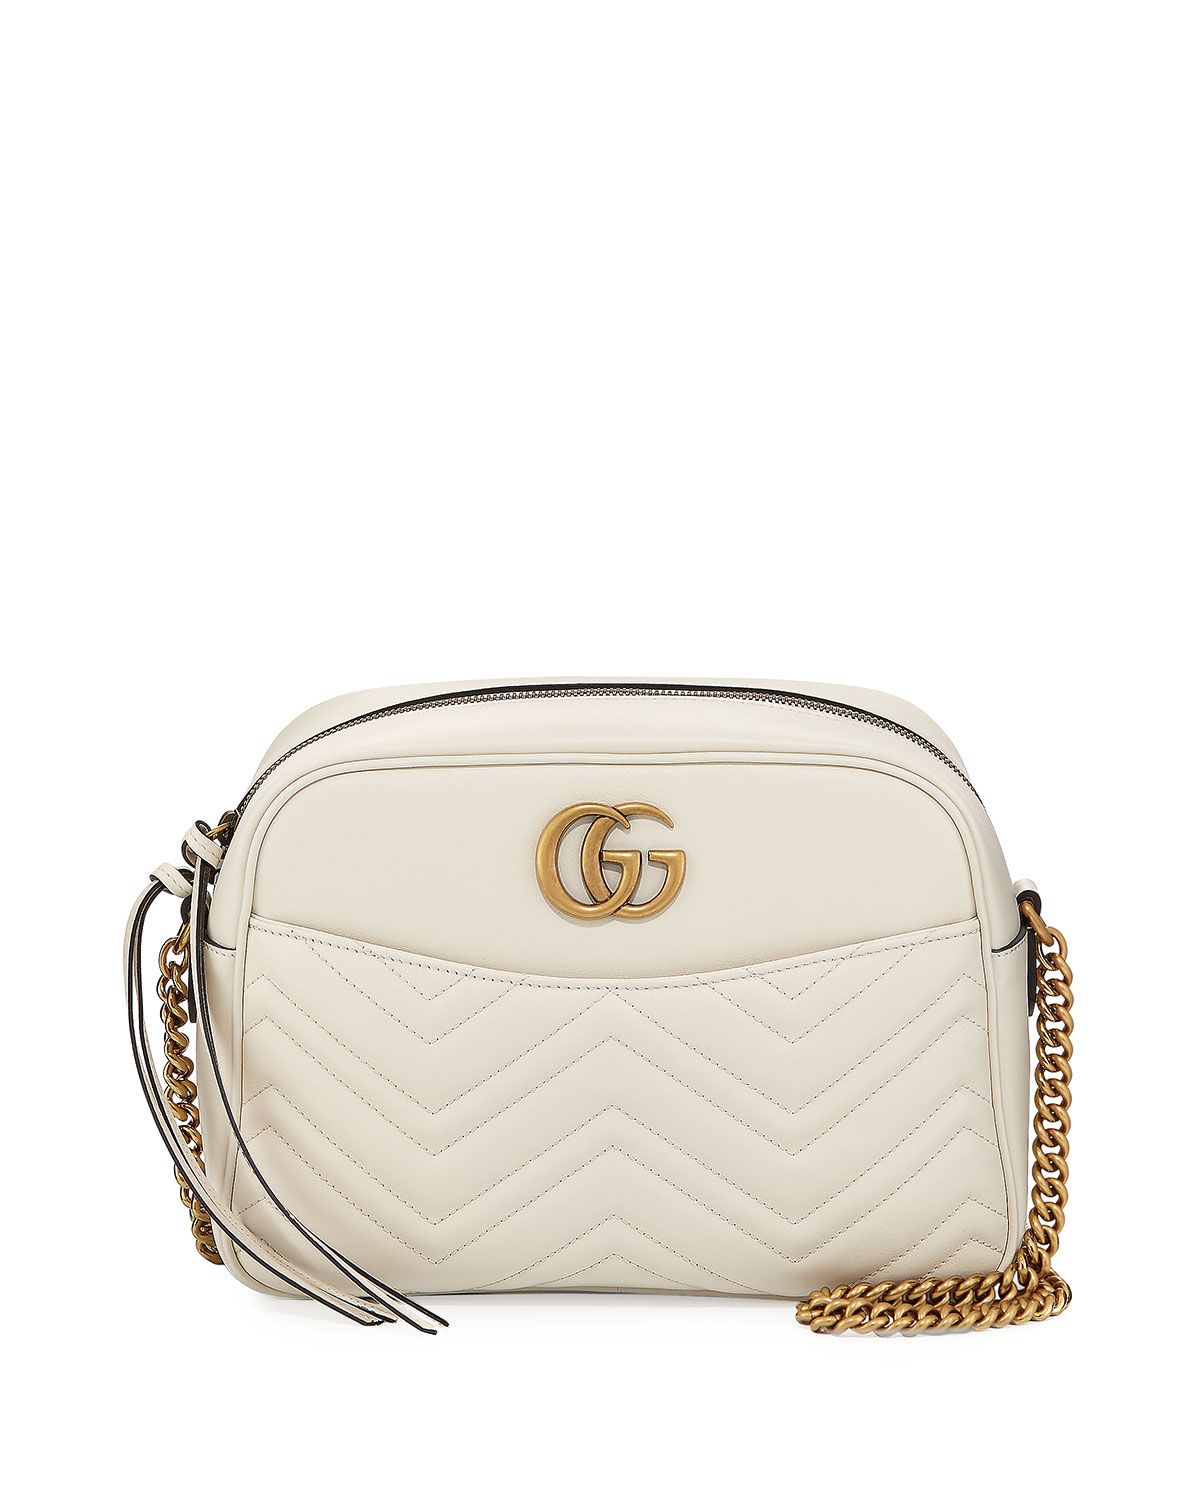 Gucci GG Marmont 2.0 Medium Quilted Camera Bag, White | Neiman Marcus